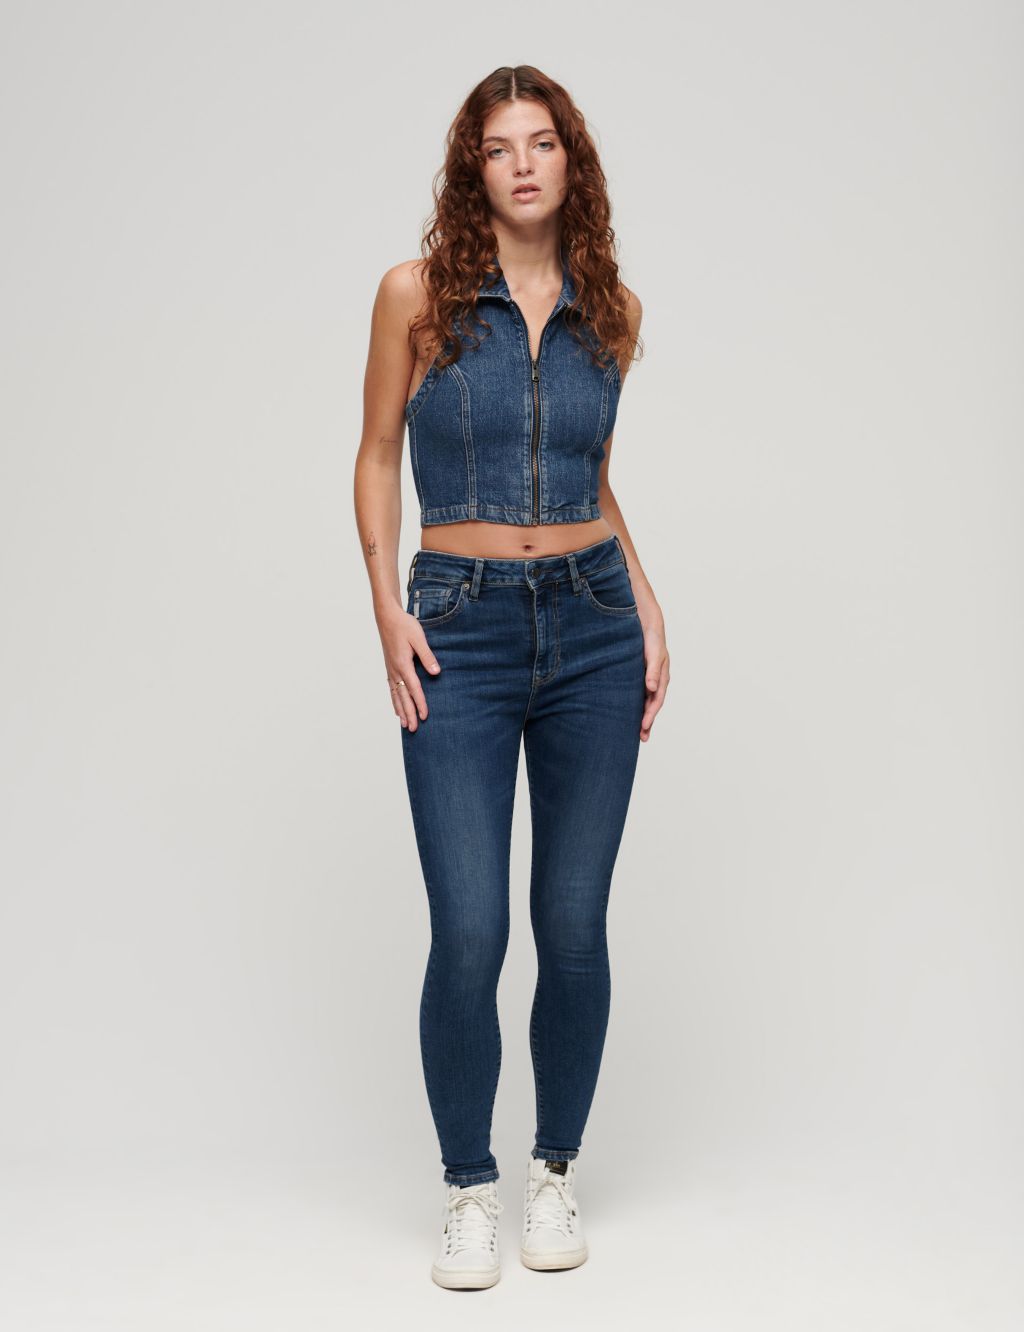 High Waisted Skinny Jeans 1 of 3